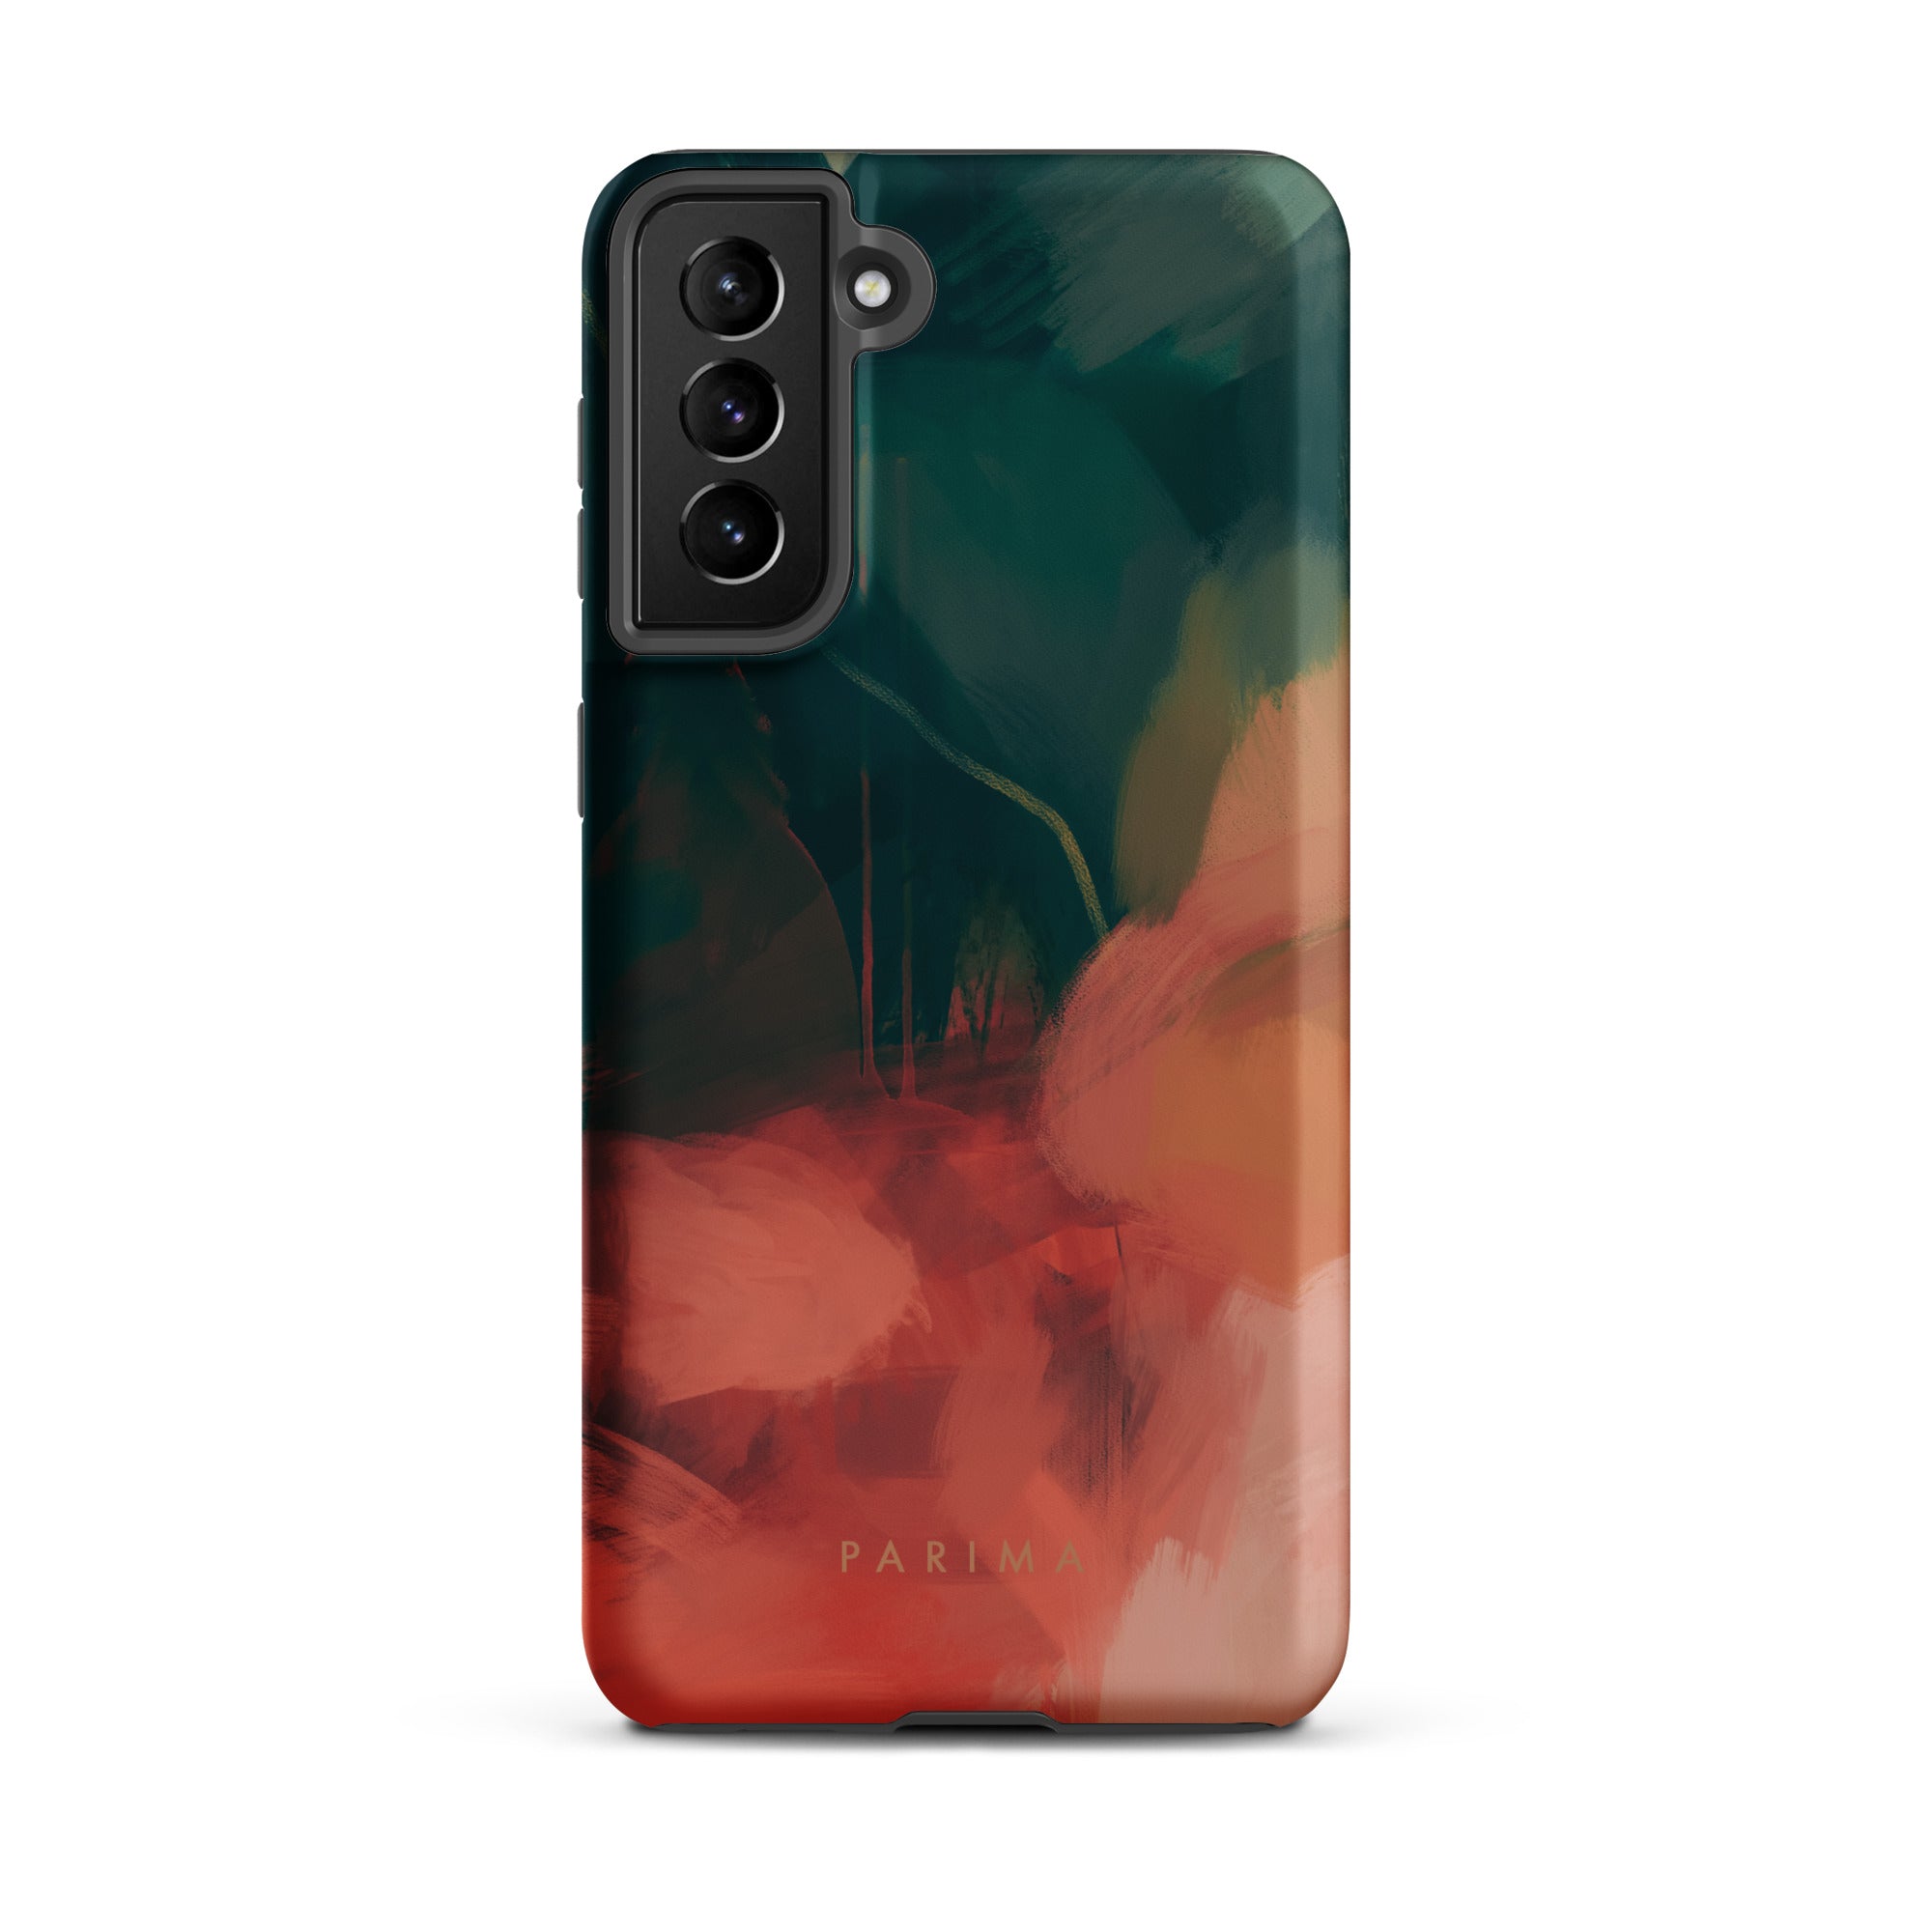 Eventide, green and red abstract art on Samsung Galaxy S21 plus tough case by Parima Studio